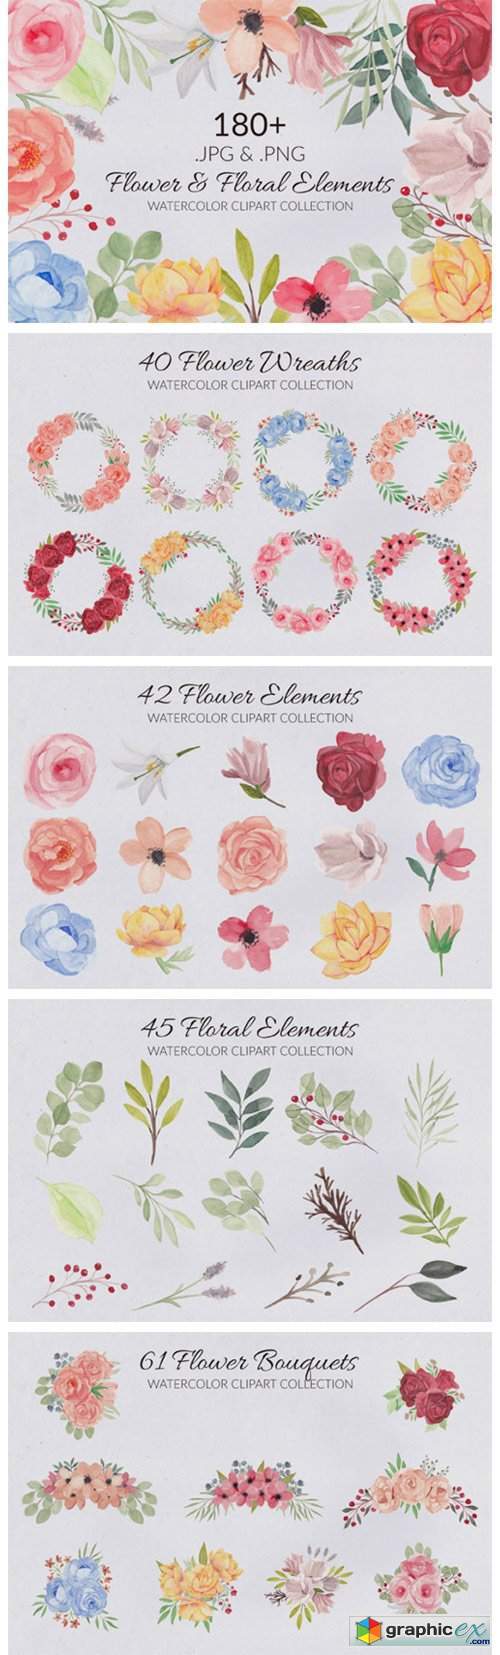 188 Flower and Floral Watercolor Set